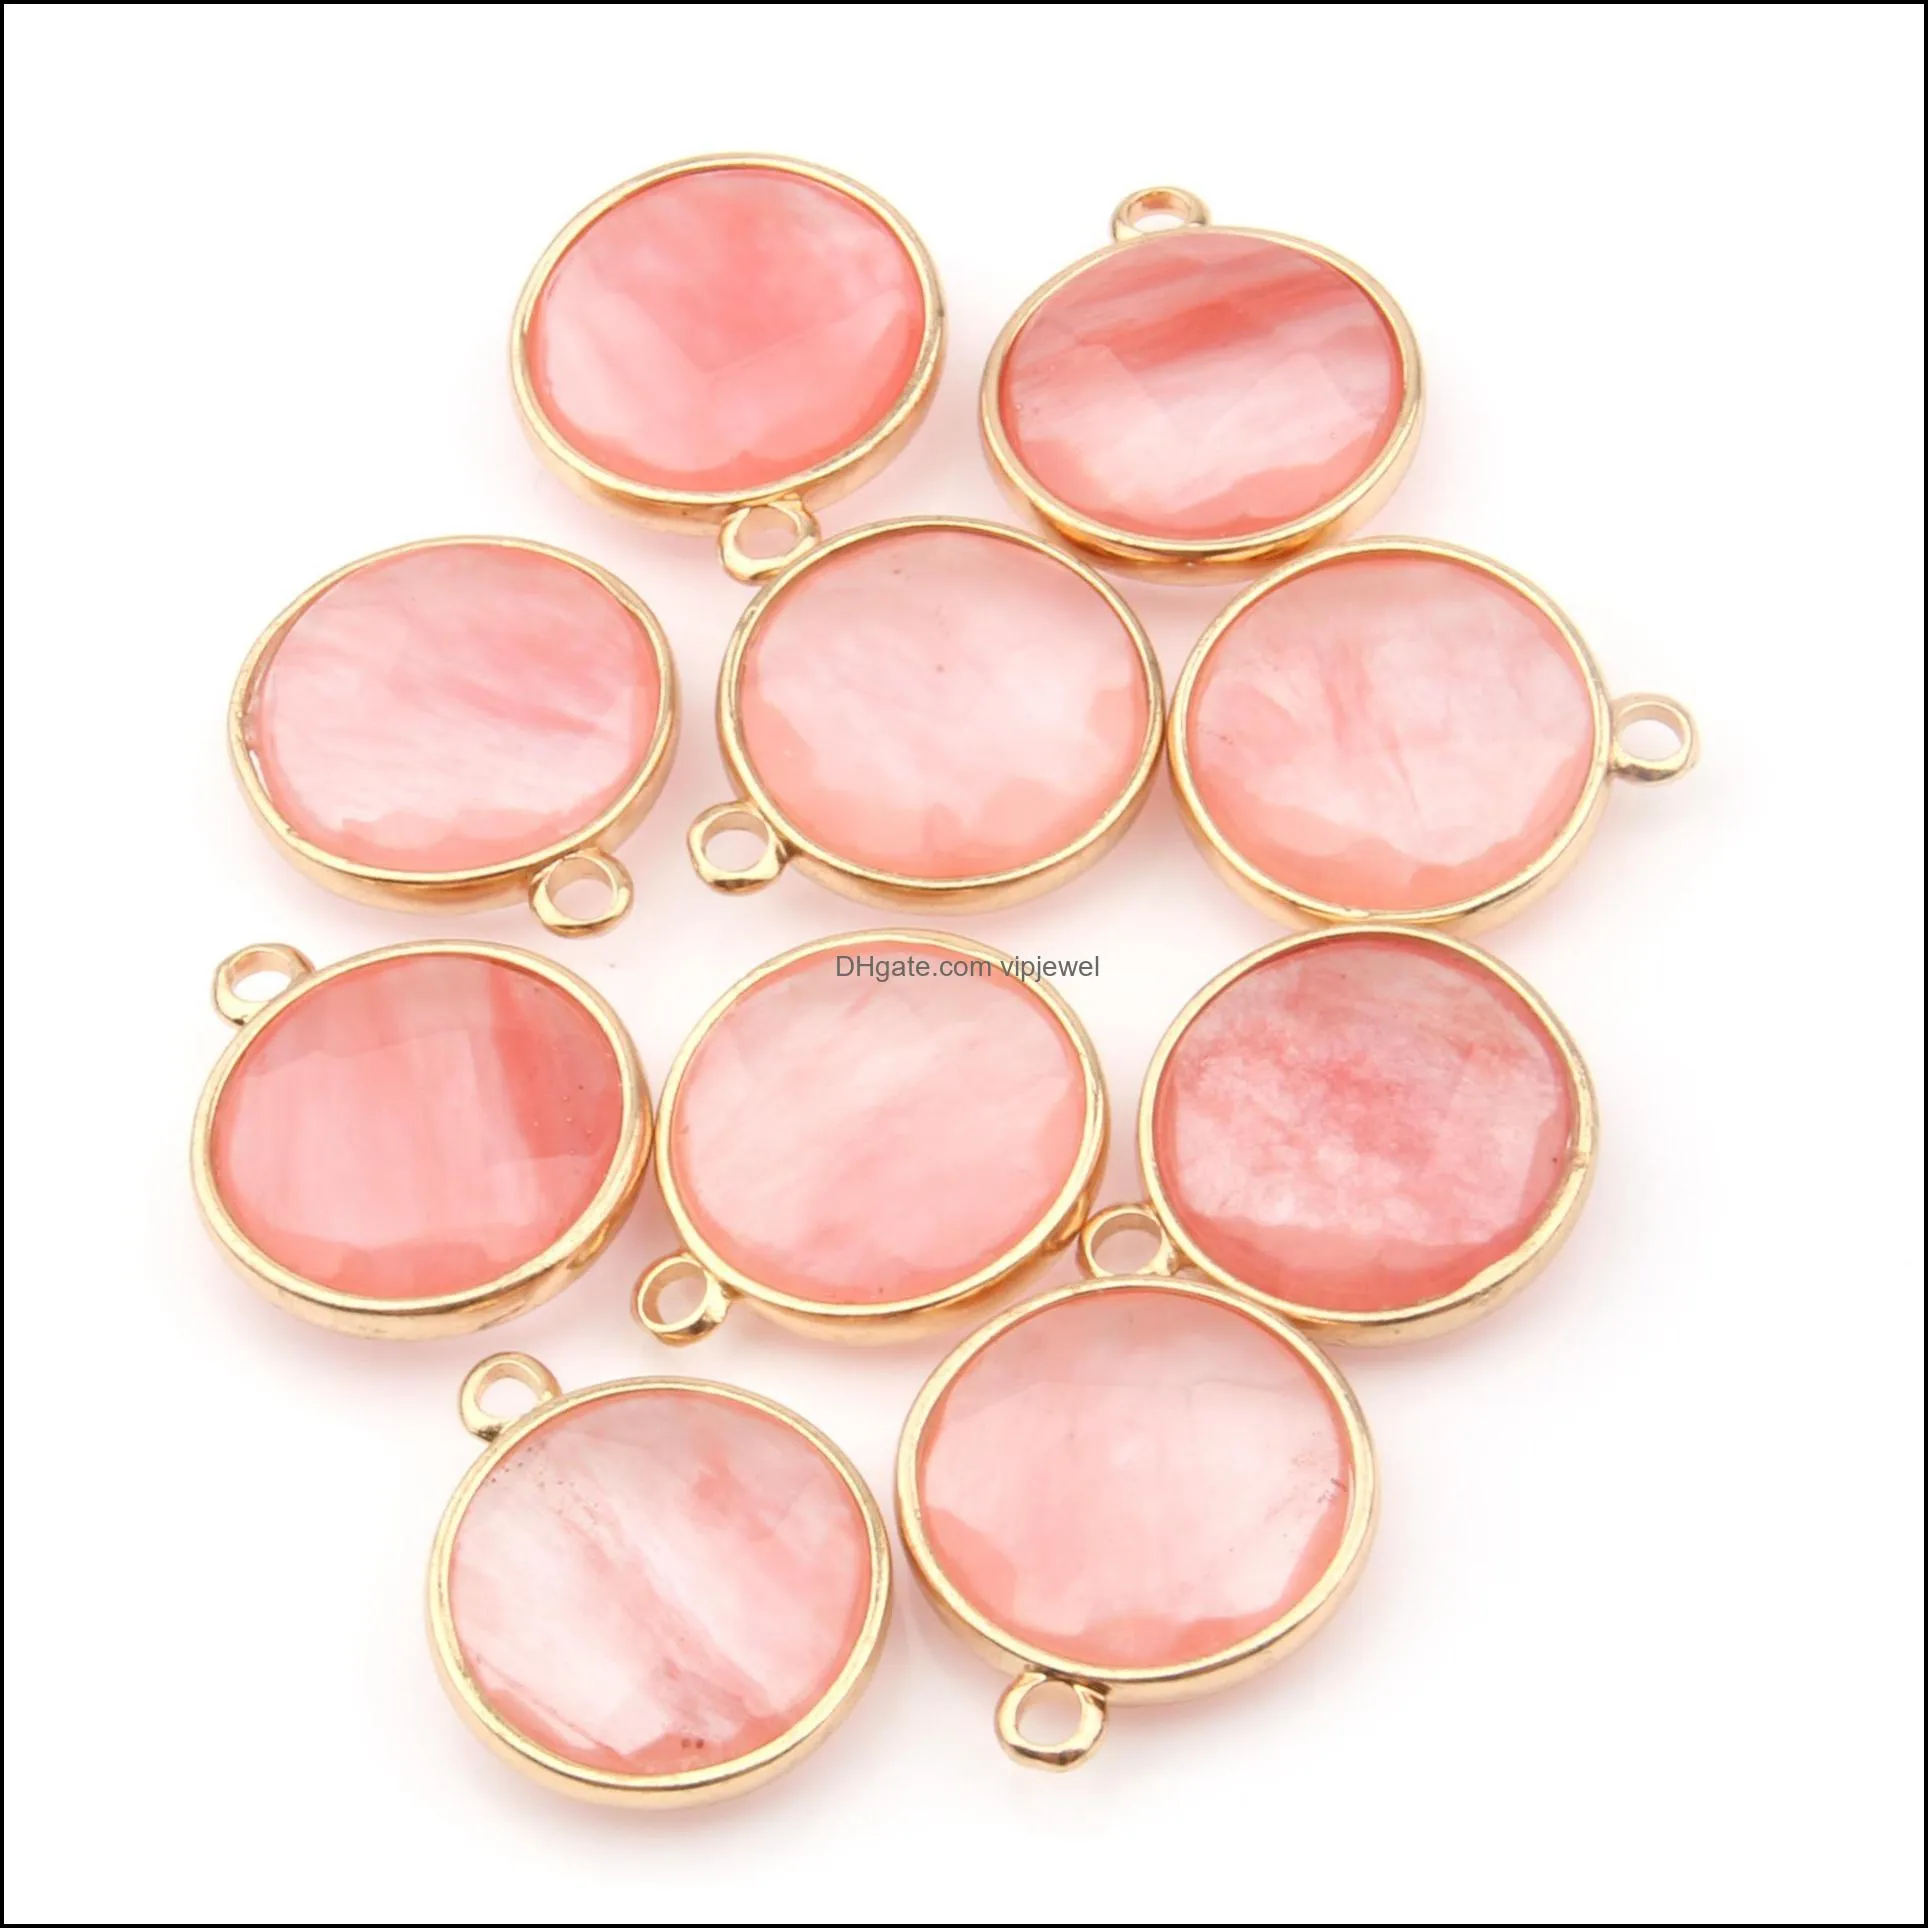 round shape natural stone rose quartz tiger eyes opal pendant charms diy for druzy necklace earrings jewelry making